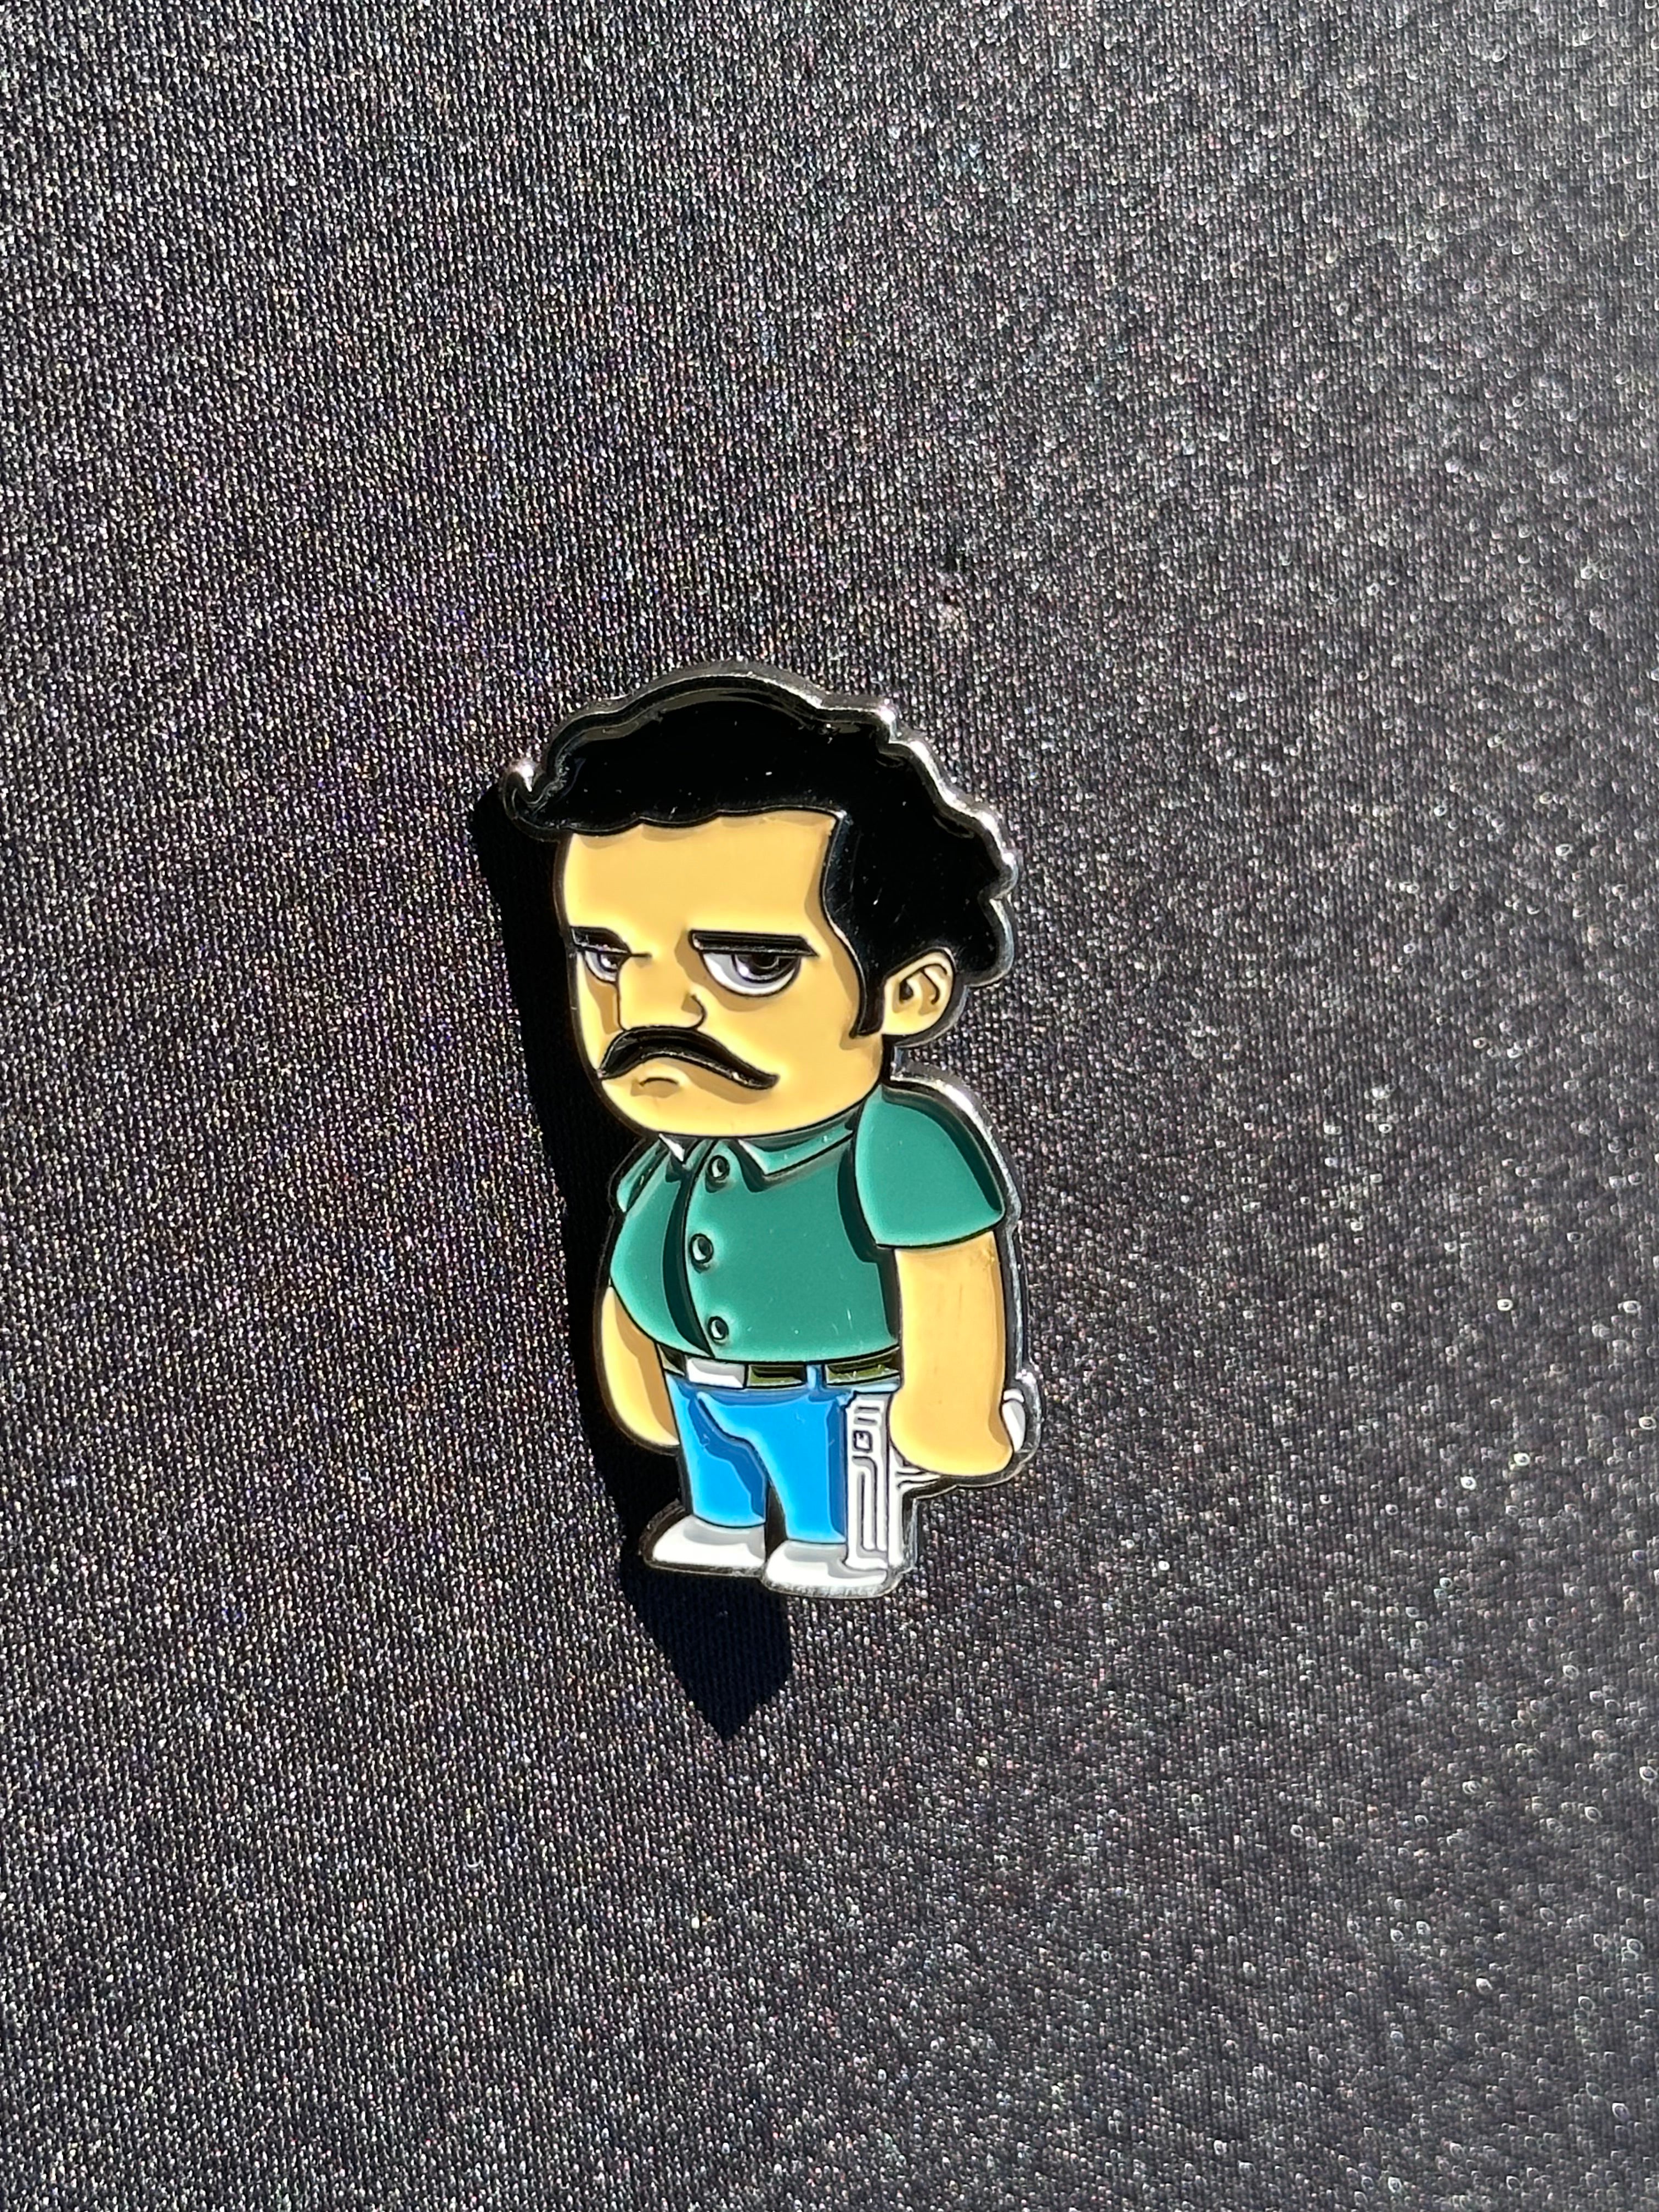 *NEW "PABLO ESCOBAR" EXCLUSIVE PIN VERY LIMITED